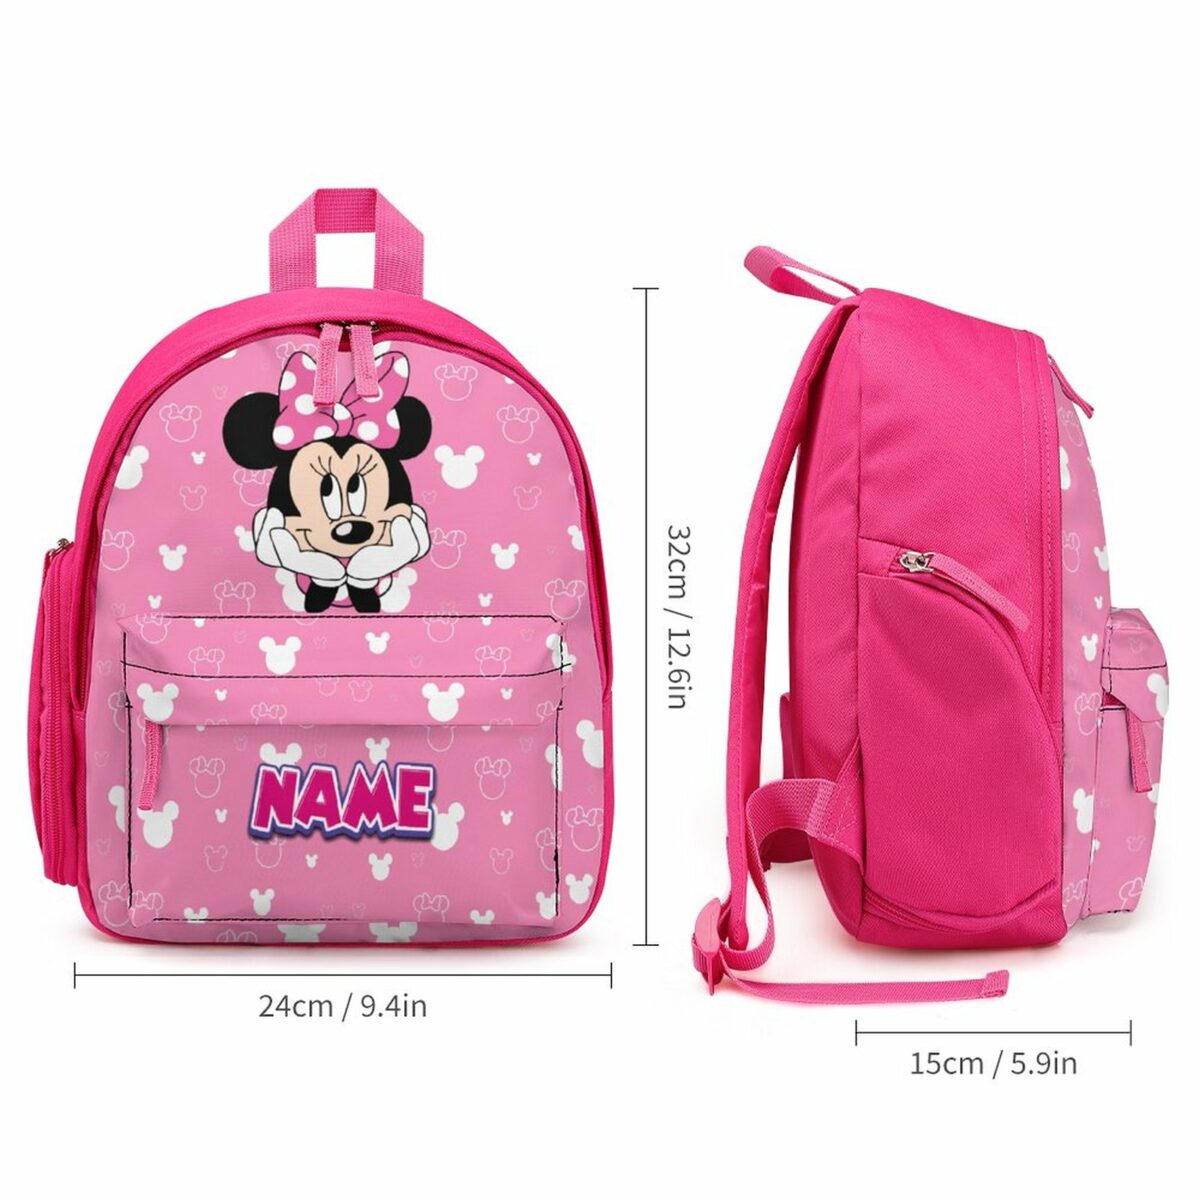 Personalized Minnie Mouse Children’s School Bag – Toddler’s Backpack Cool Kiddo 12